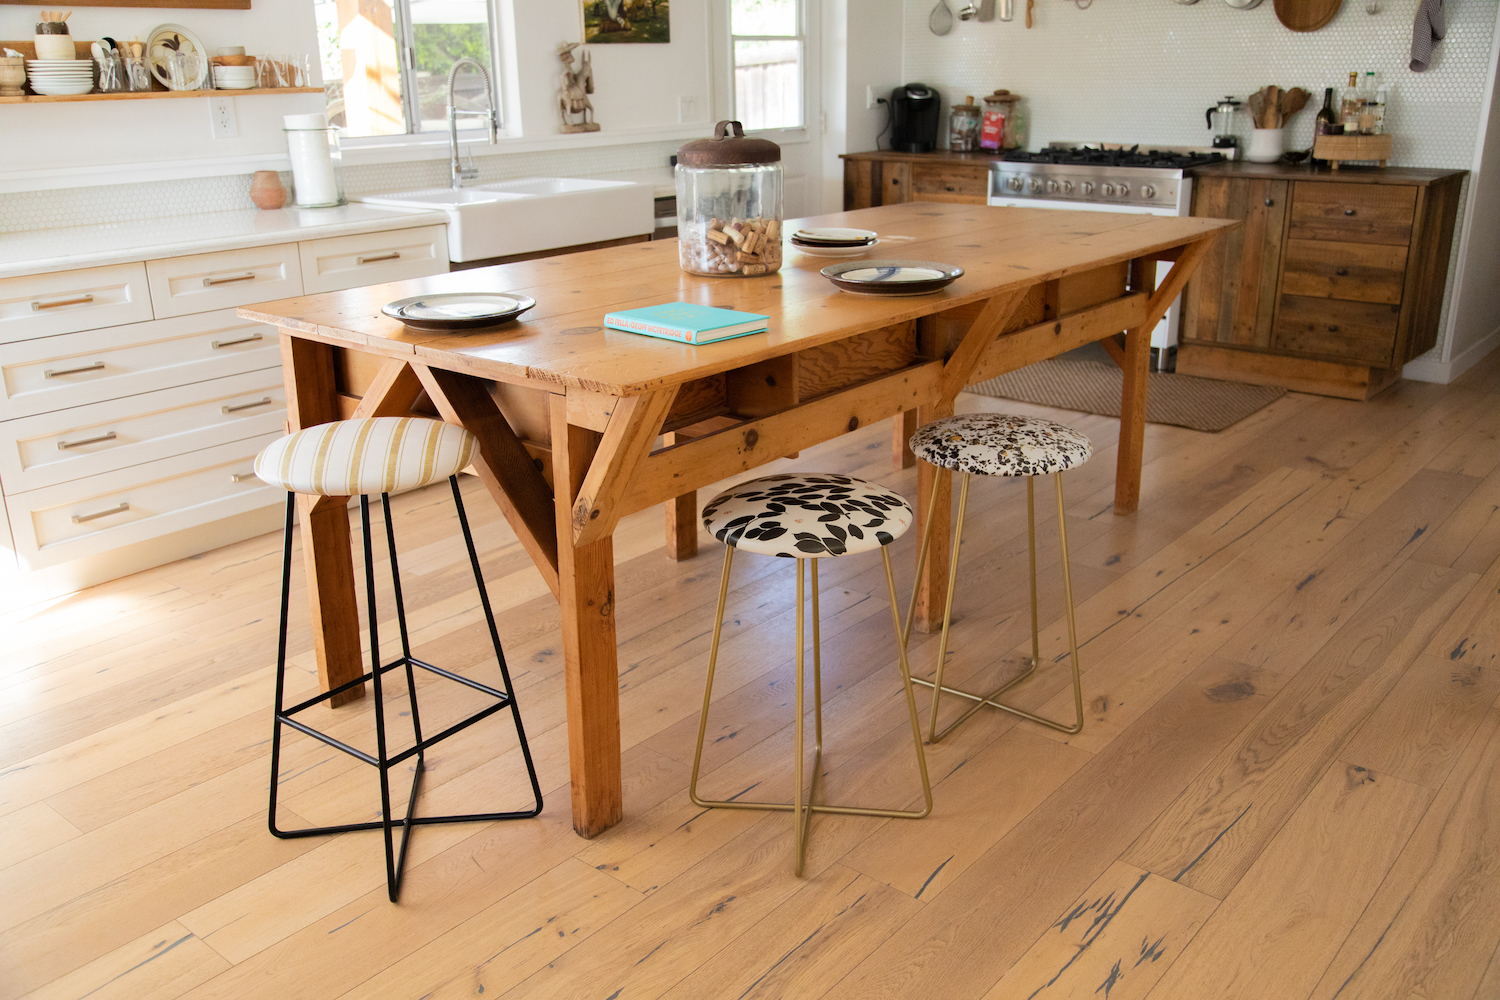 What Height Of Bar Stool, How To Measure Kitchen Counter Stools